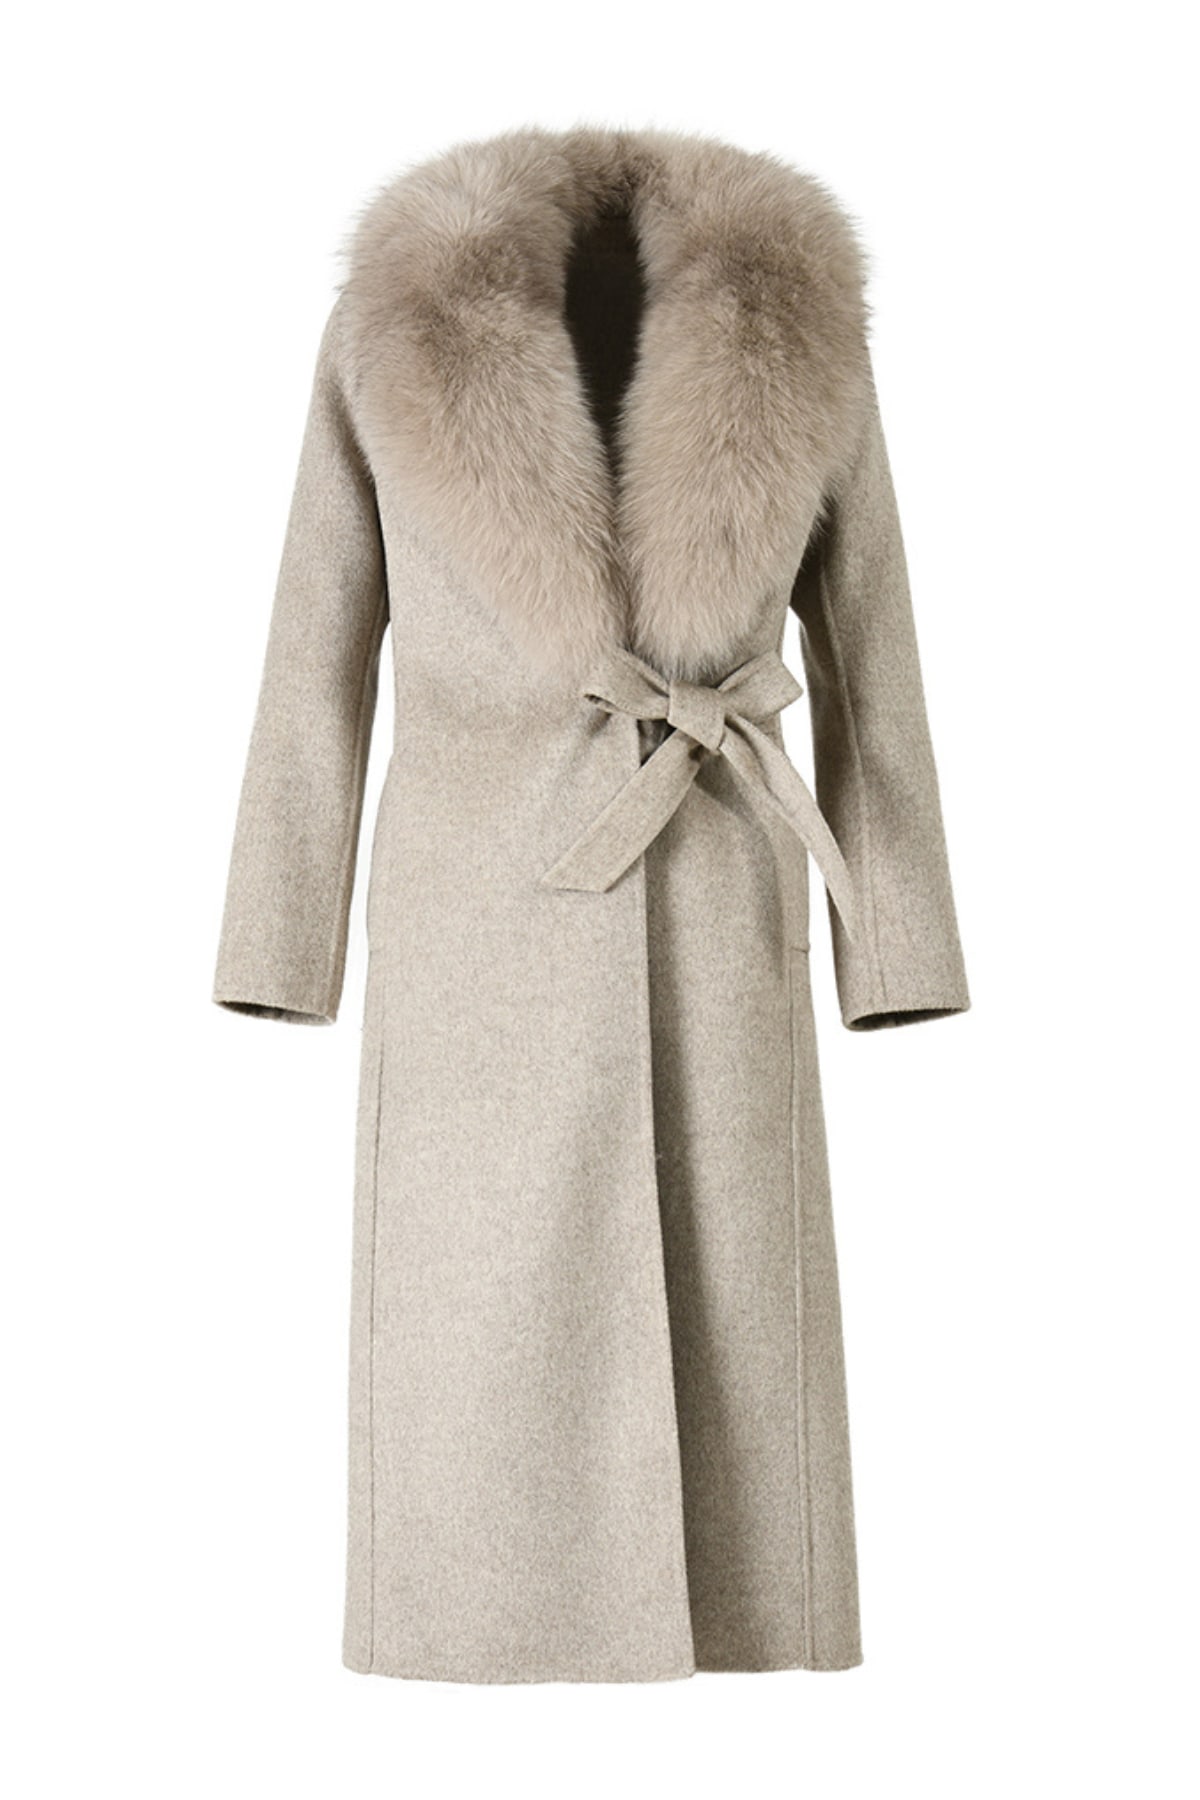 Hortons England Women's Neutrals Windsor Cashmere Coat Fawn In Gray